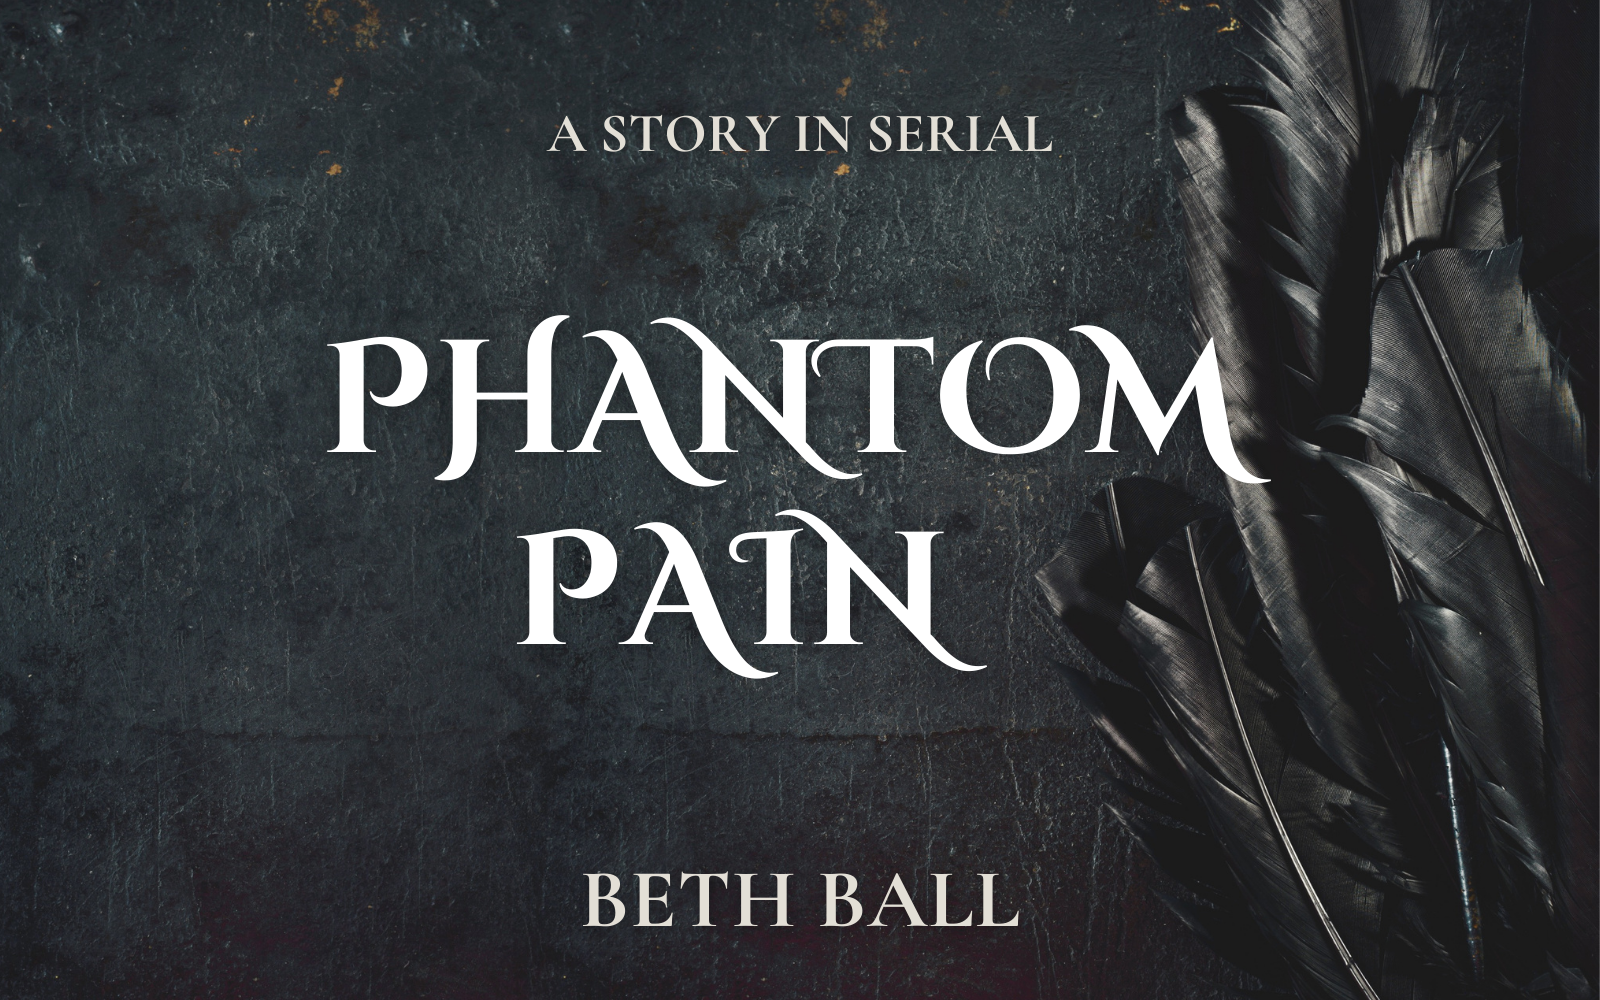 picture of raven feathers on a dark stone background with text overlay that reads Phantom Pain, A Story in Serial by Beth Ball